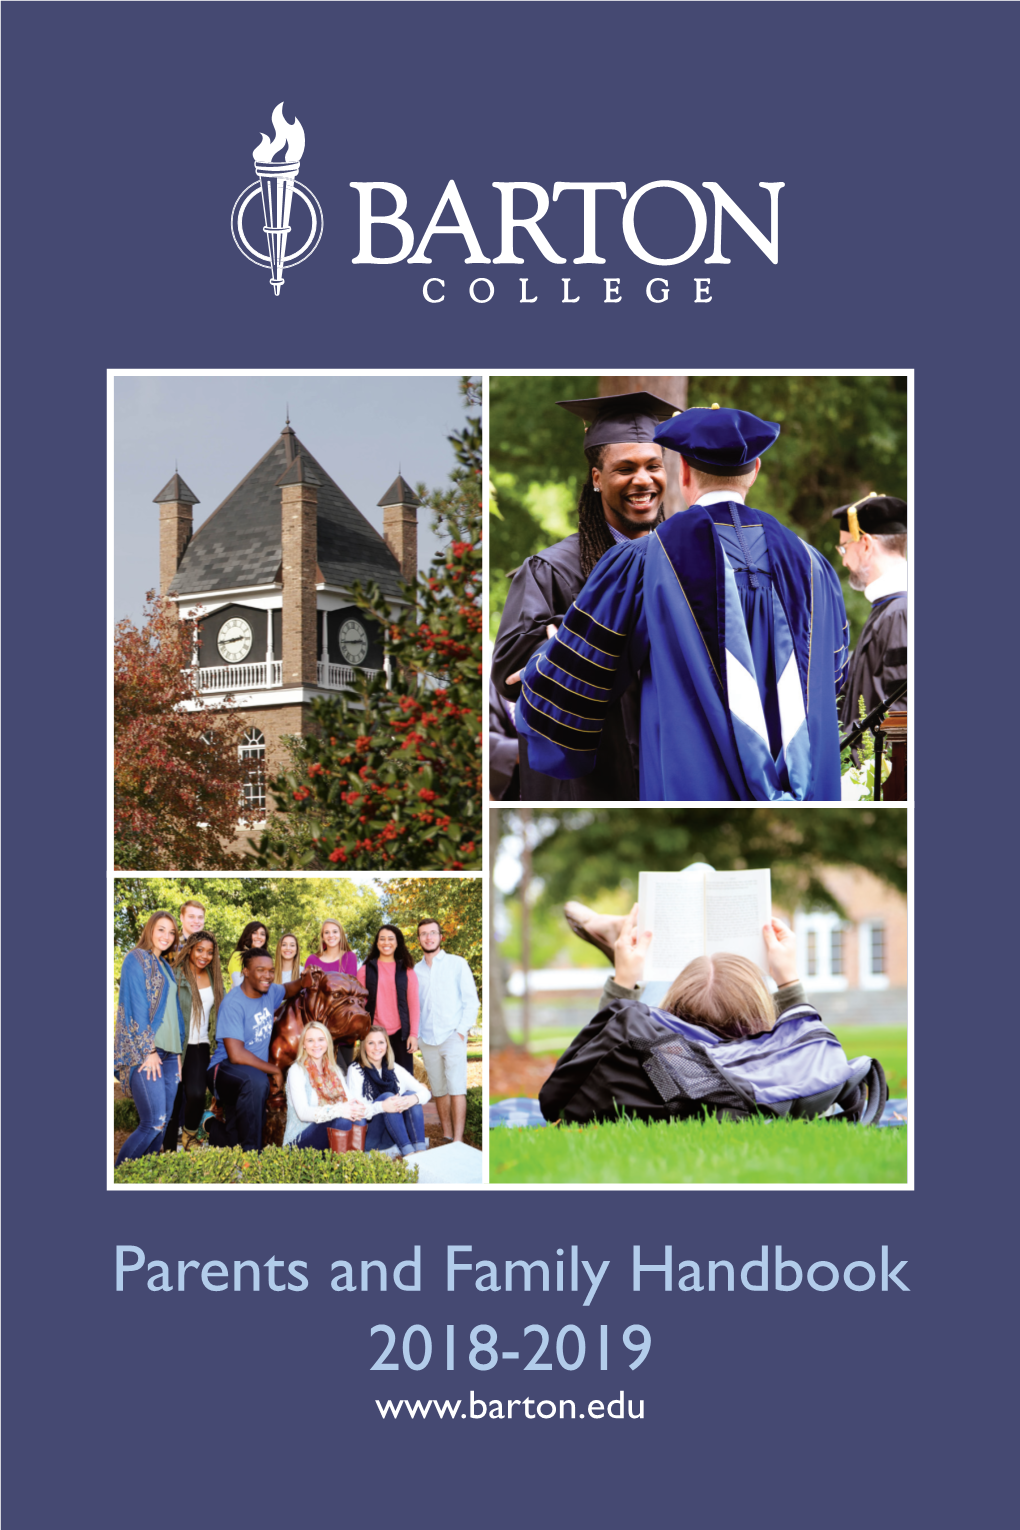 Parents and Family Handbook 2018-2019